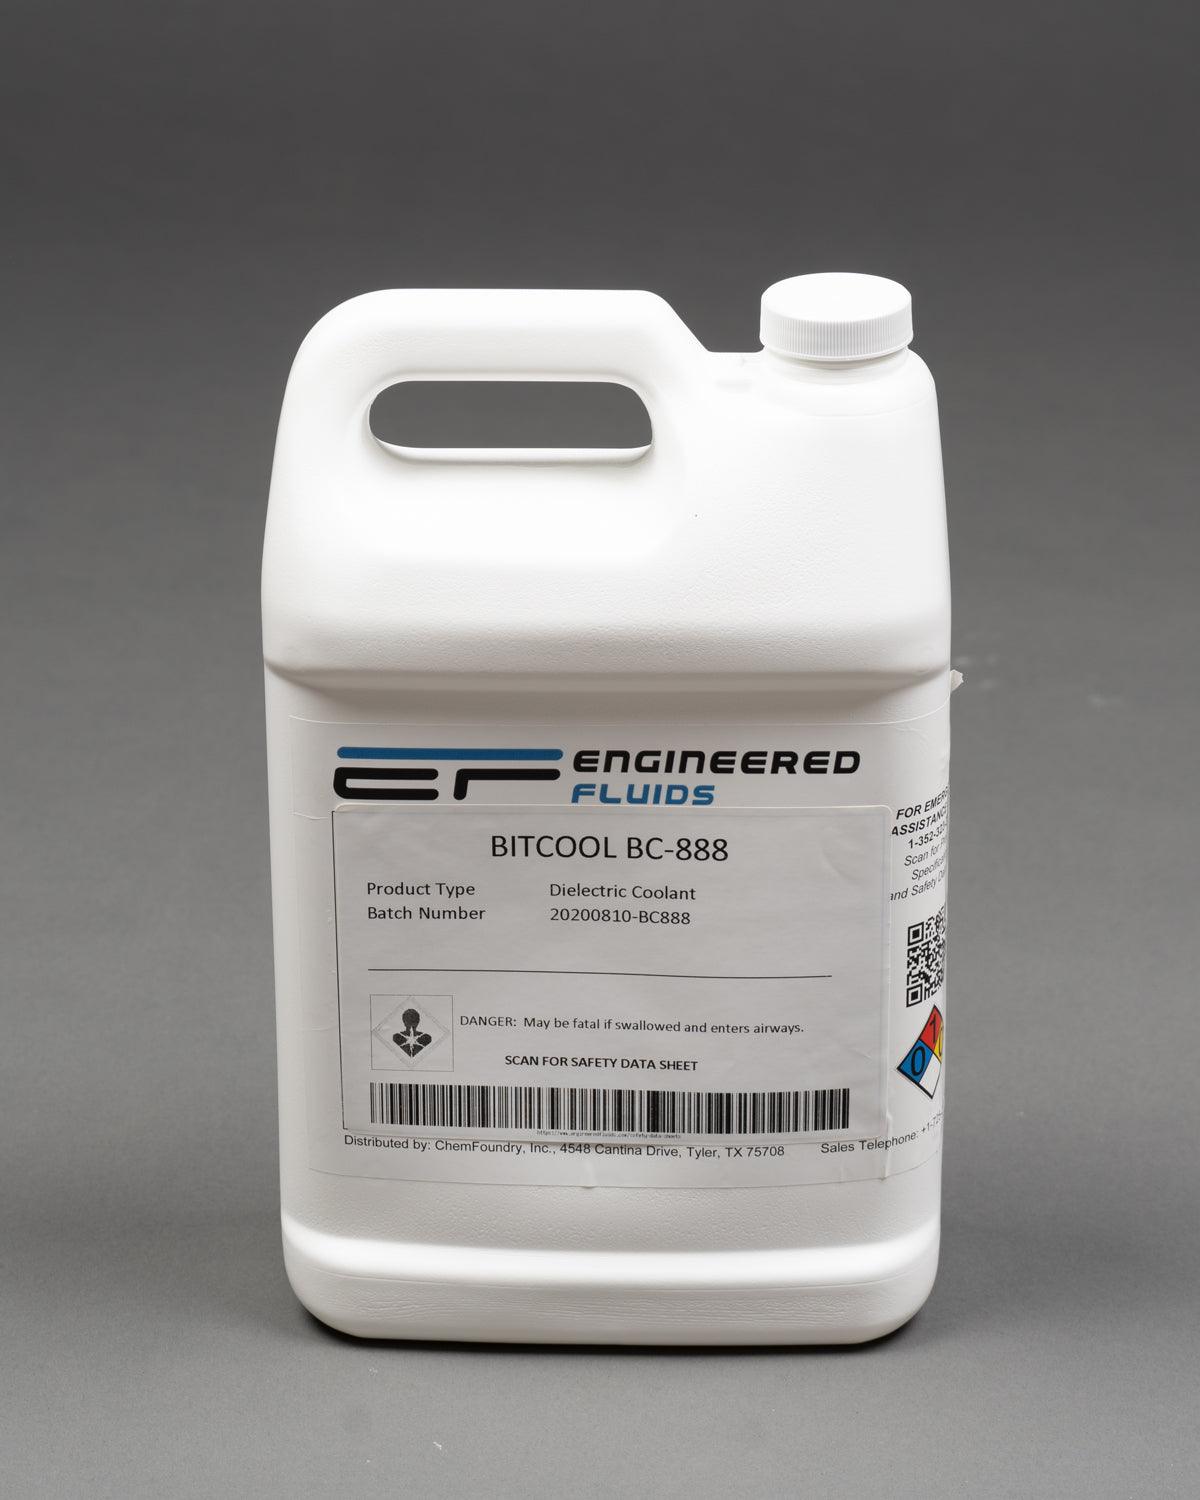 BitCool® BC-888 Dielectric Coolant - Engineered Fluids